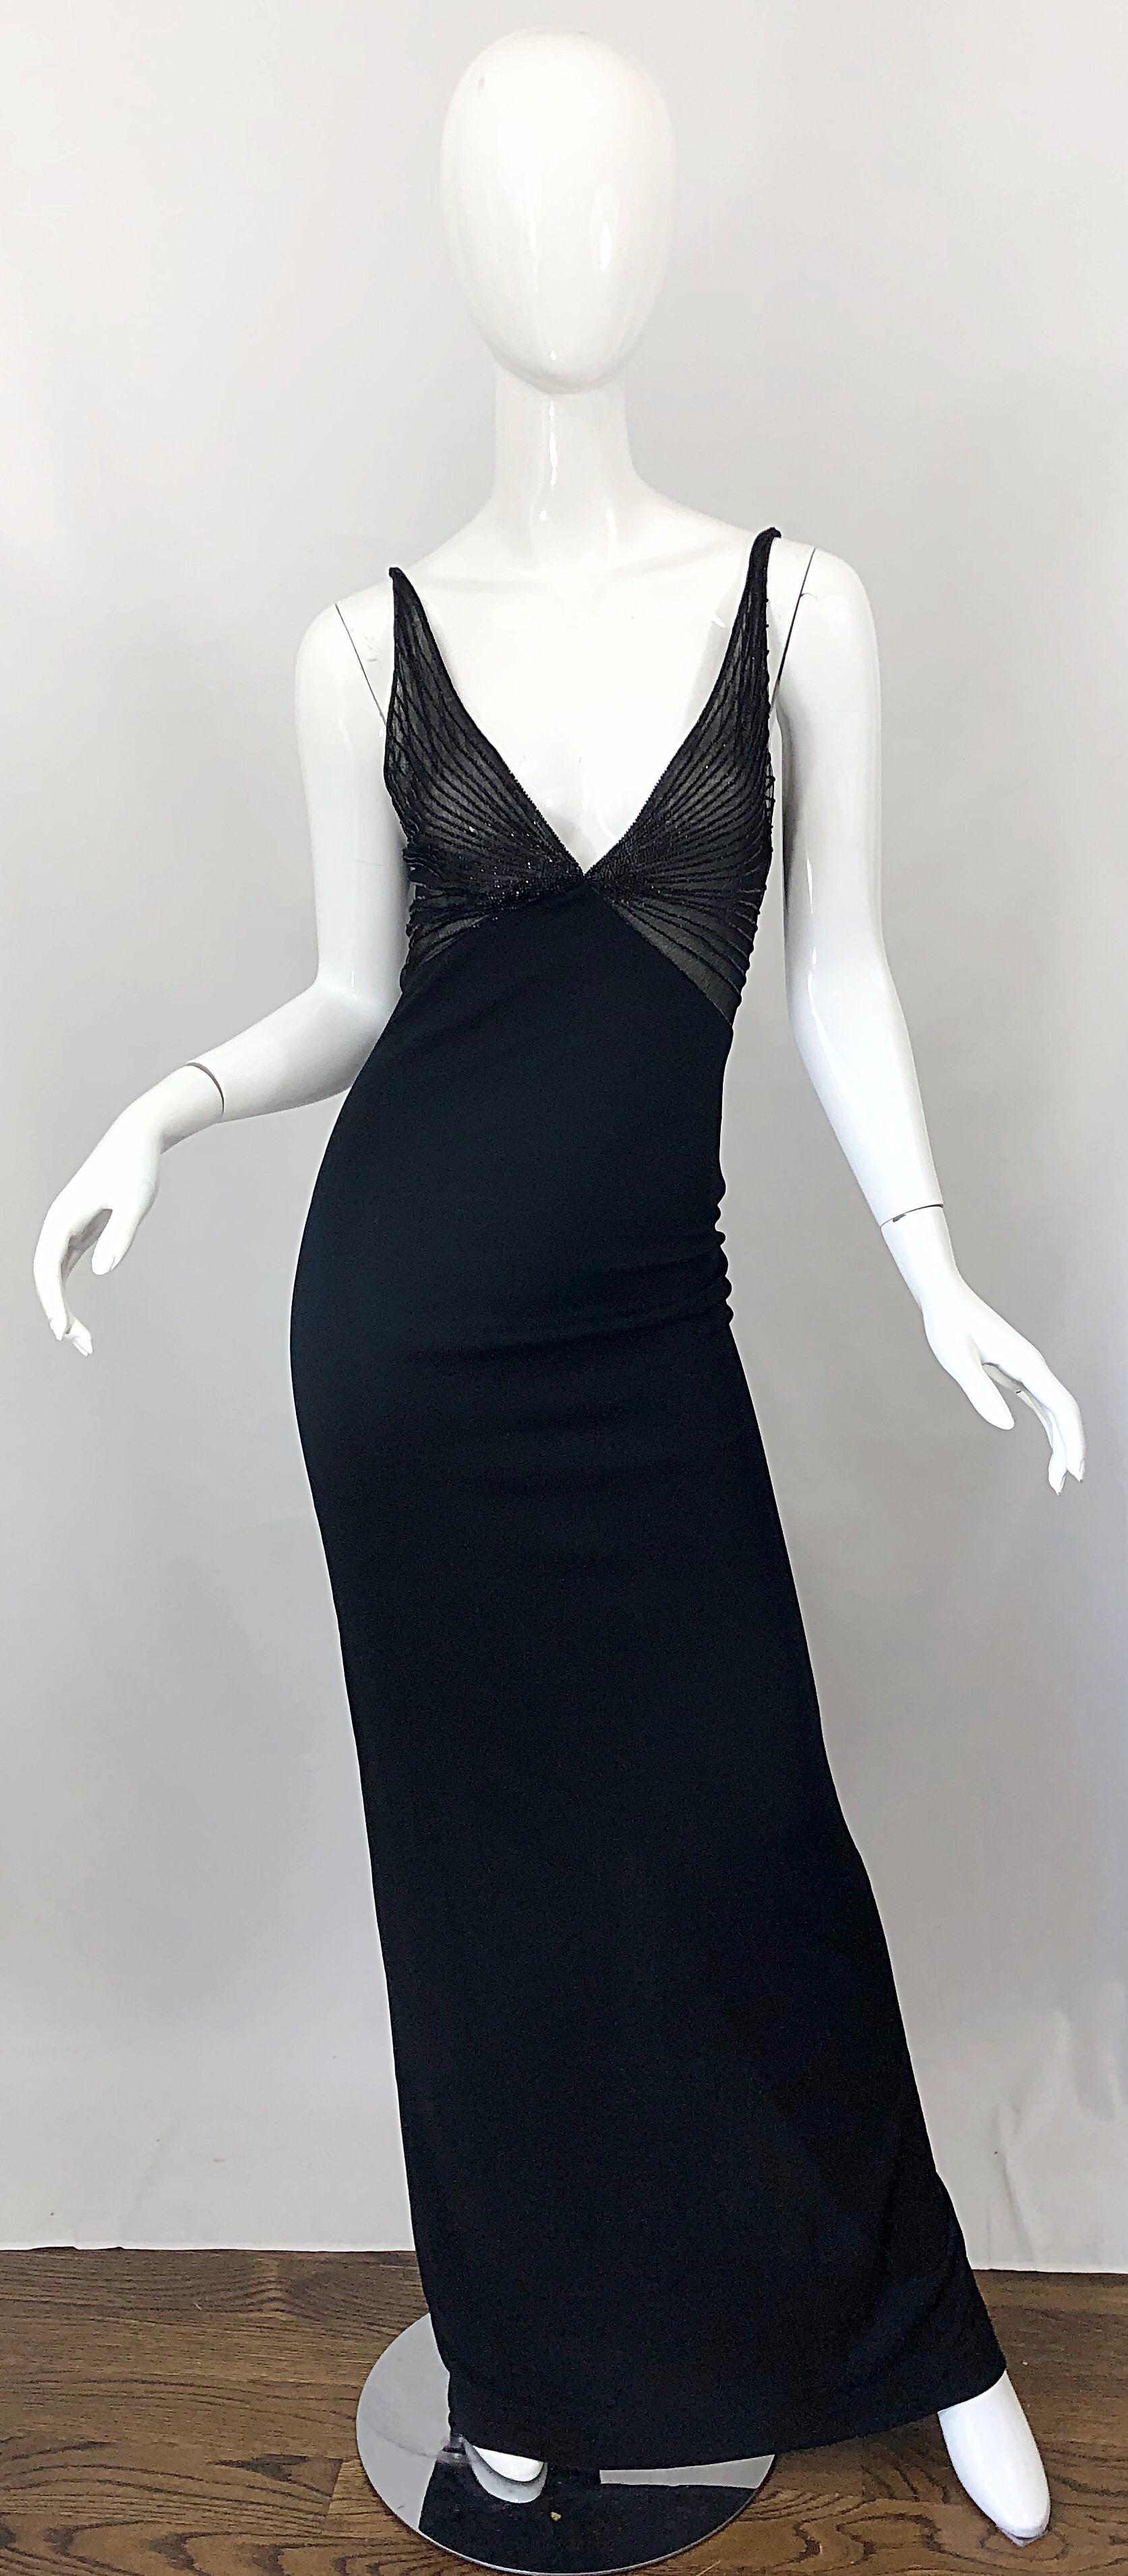 NWT 1990s Randolph Duke Couture Size 12 Black 90s Plunging Semi Sheer Gown Dress 12